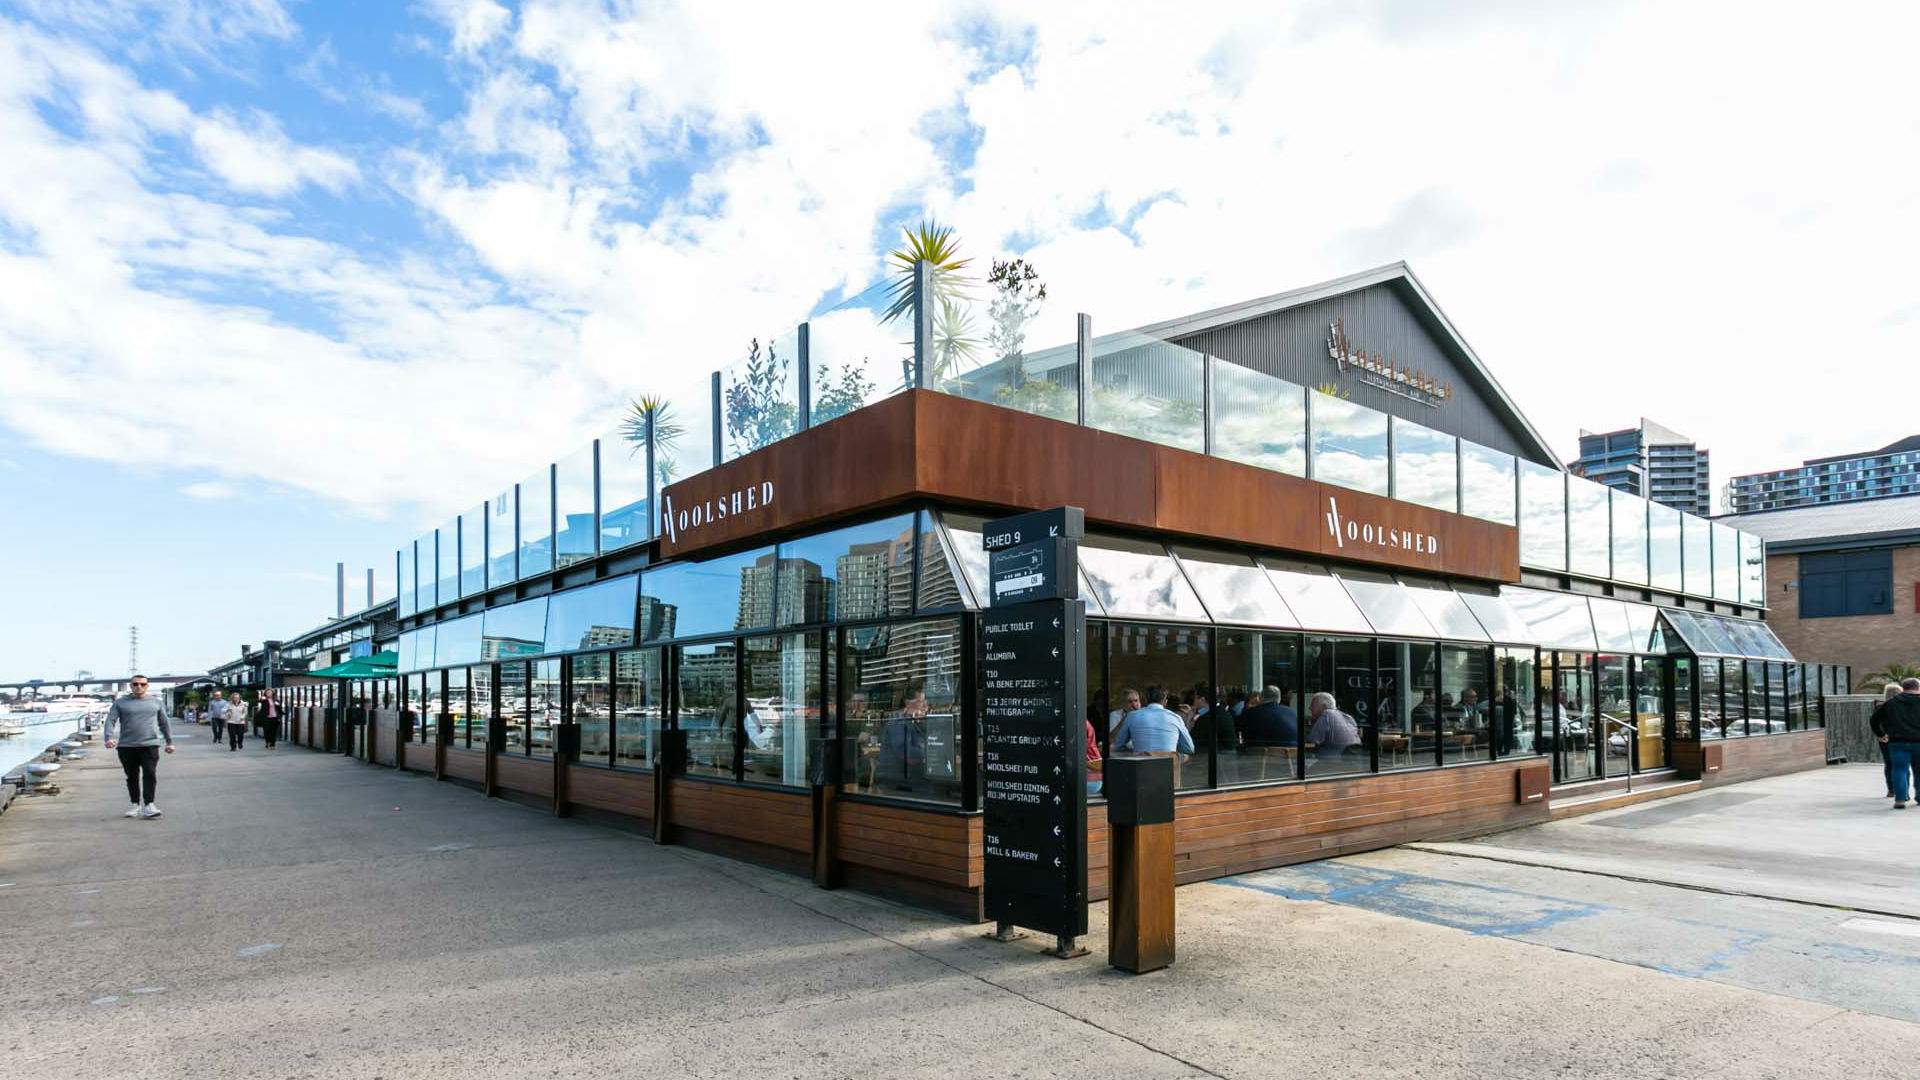 Docklands' Central Pier and All of Its Venues Have Shut Indefinitely Due to Safety Concerns